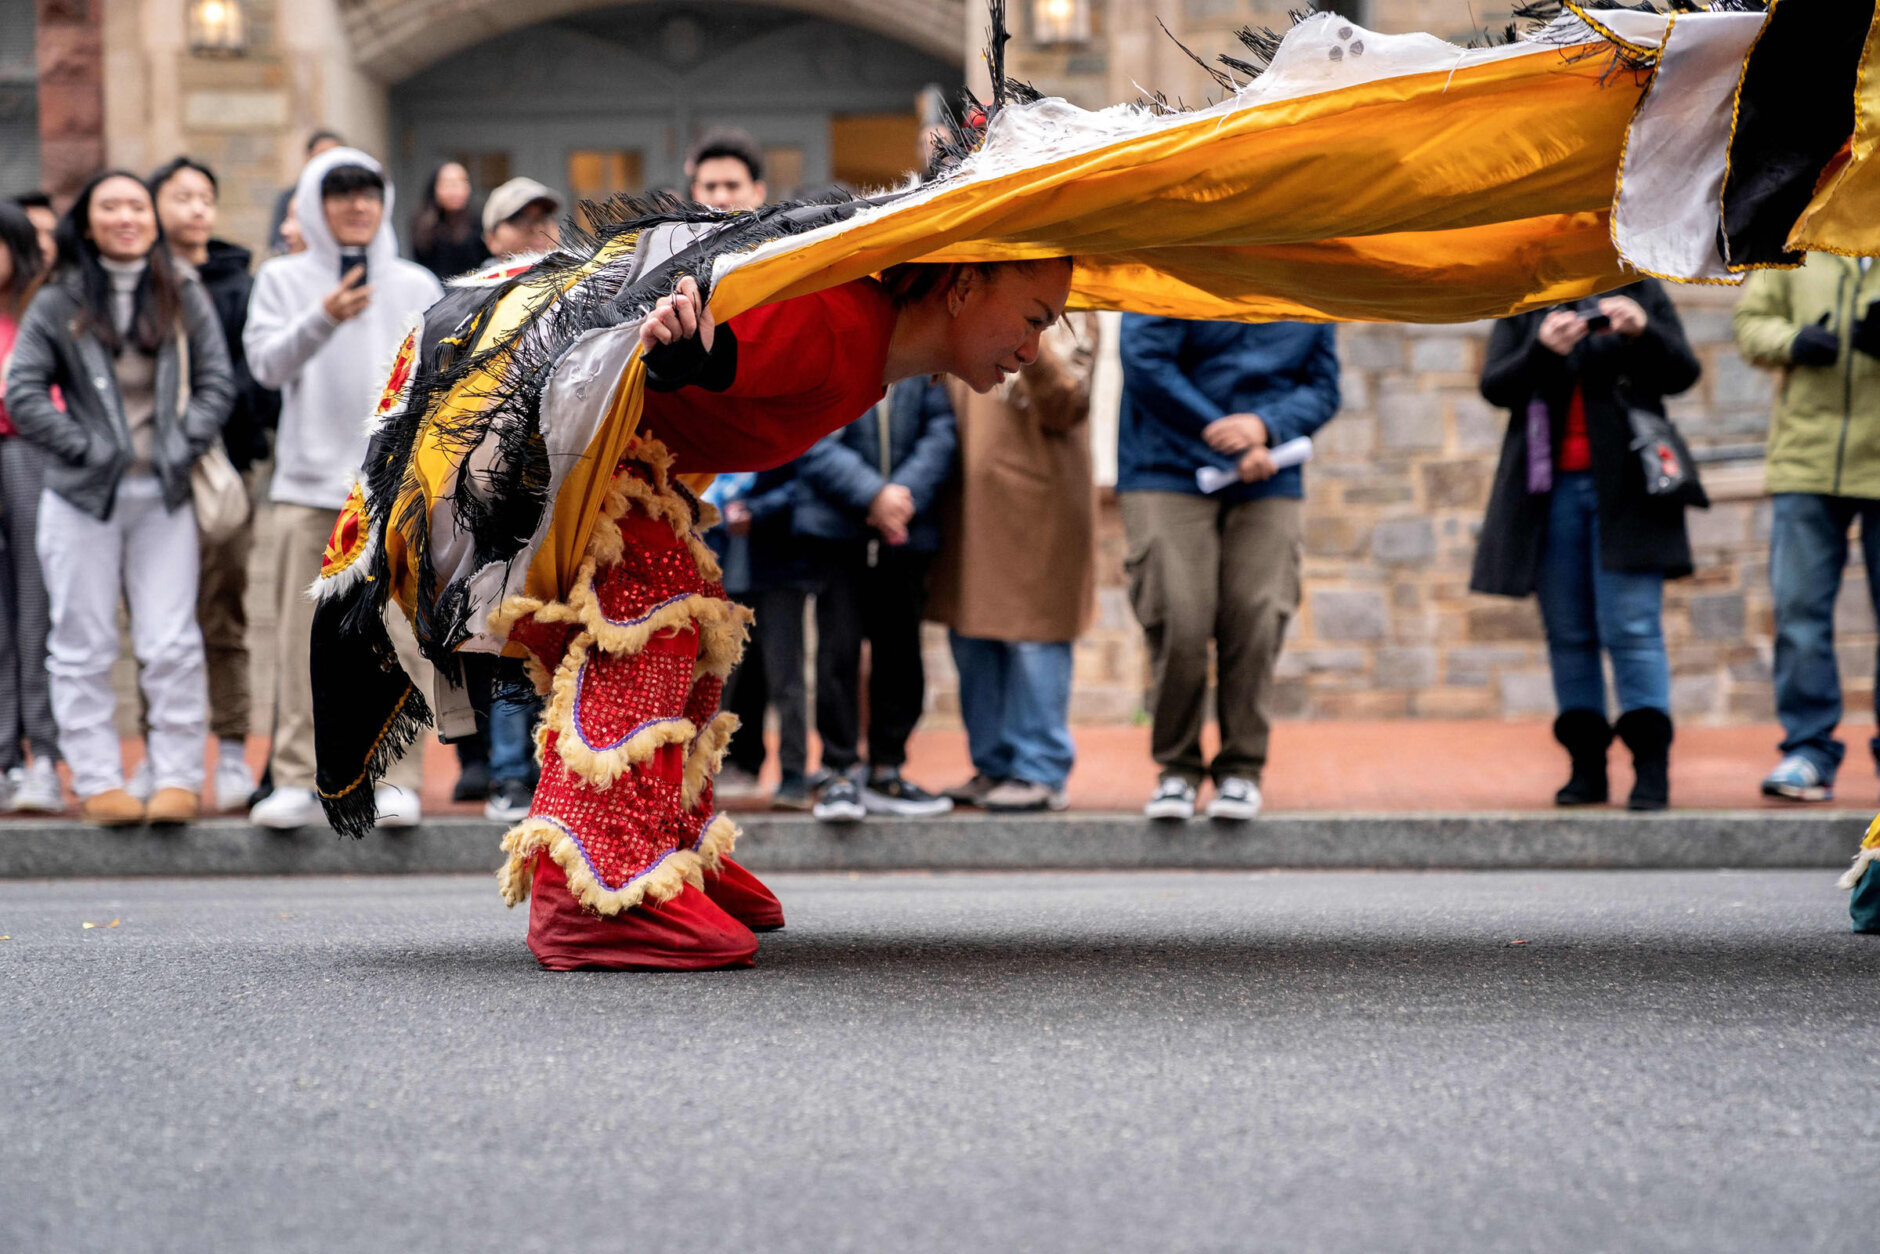 A participant dances during the Lunar New Year Parade in the Chinatown neighborhood of Washington, DC, on January 22, 2023. - 2023 is the year of the rabbit in the Chinese horoscope. (Photo by Stefani Reynolds / AFP) (Photo by STEFANI REYNOLDS/AFP via Getty Images)